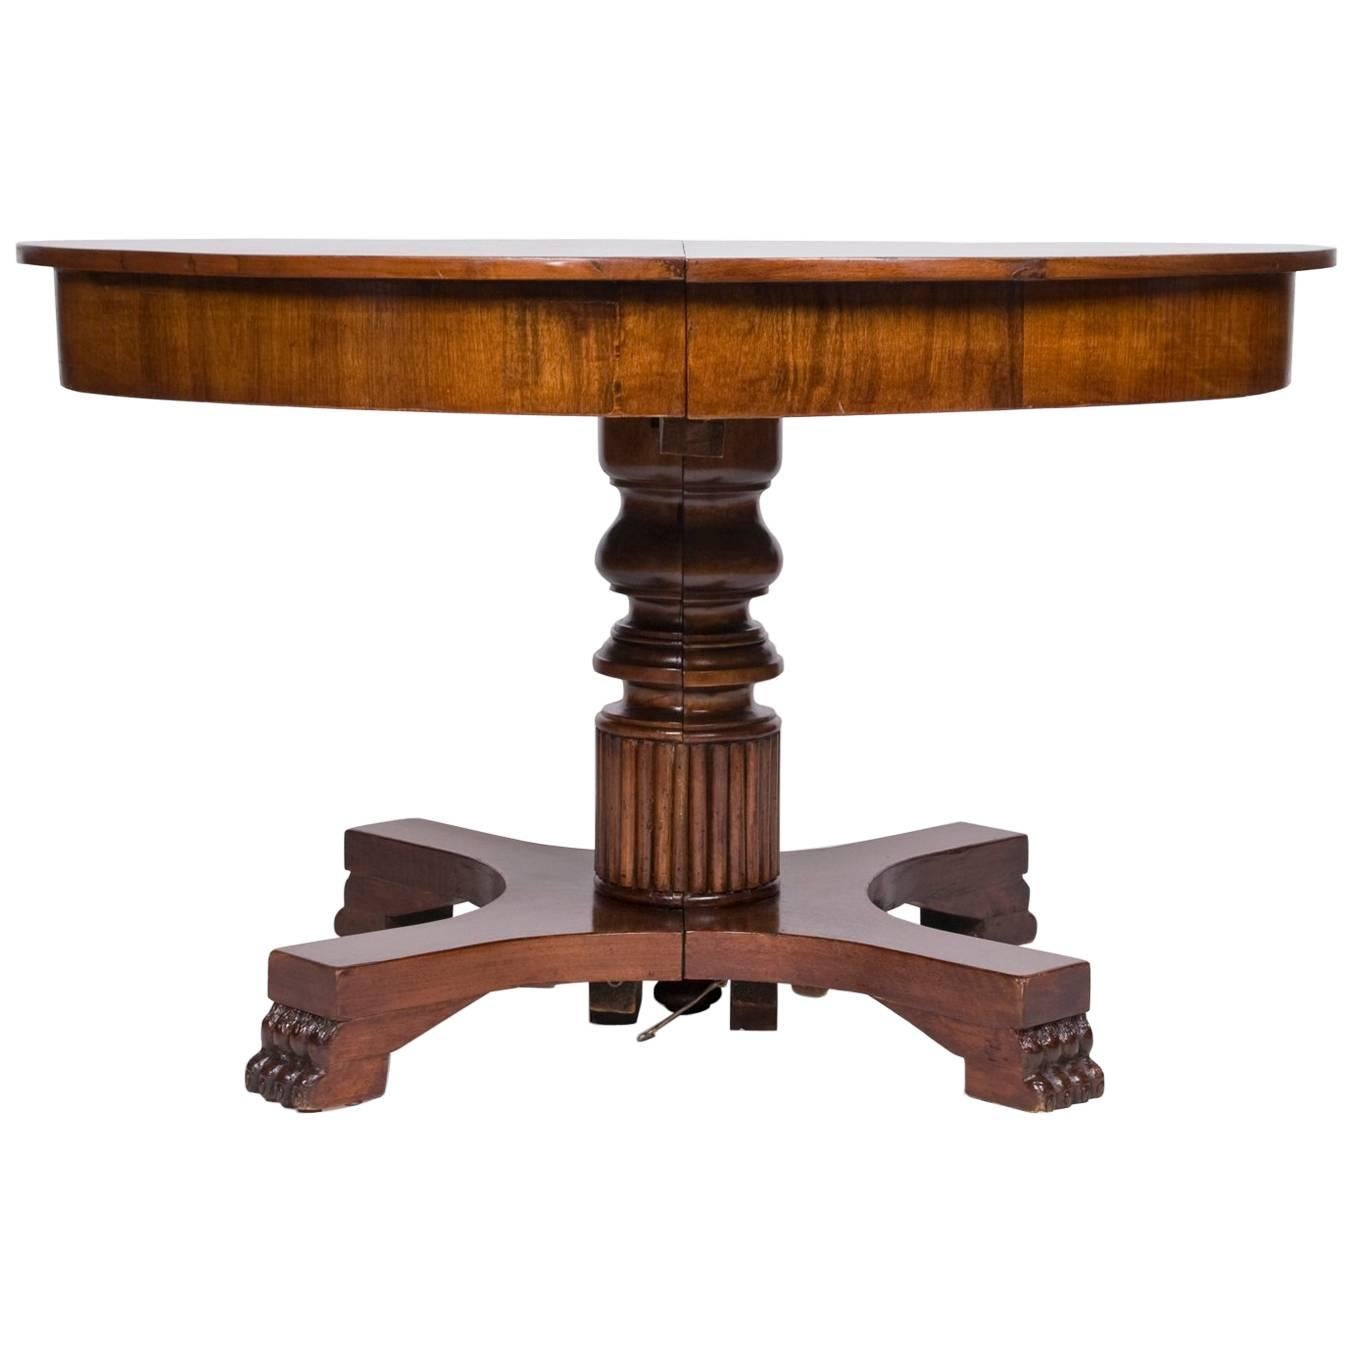 Antique Empire Extension Table from circa 1900